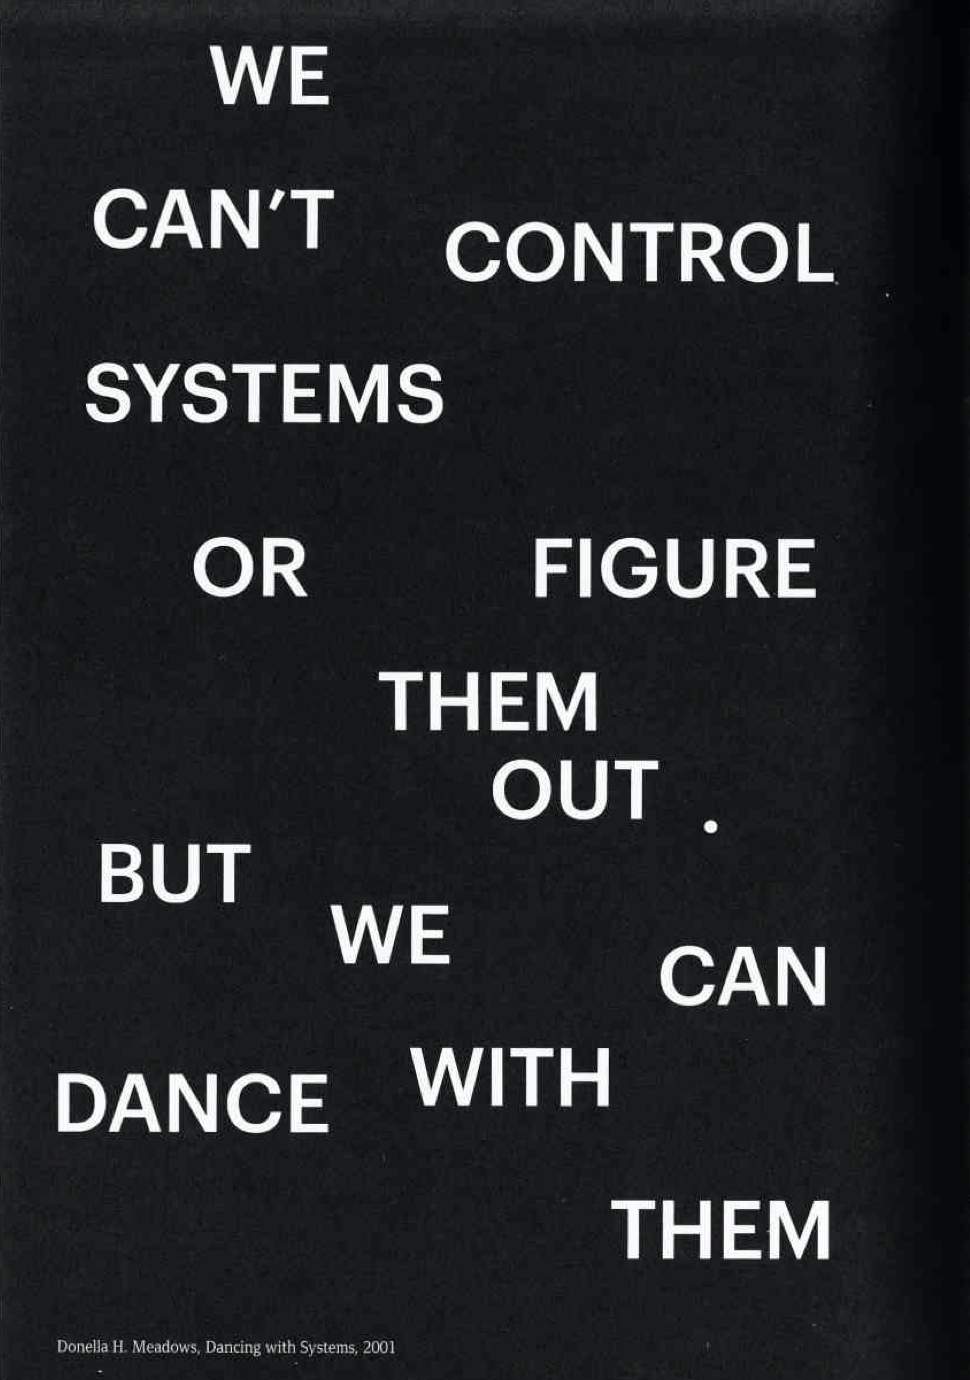 Donella H. Meadows, Dancing with systems, 2001